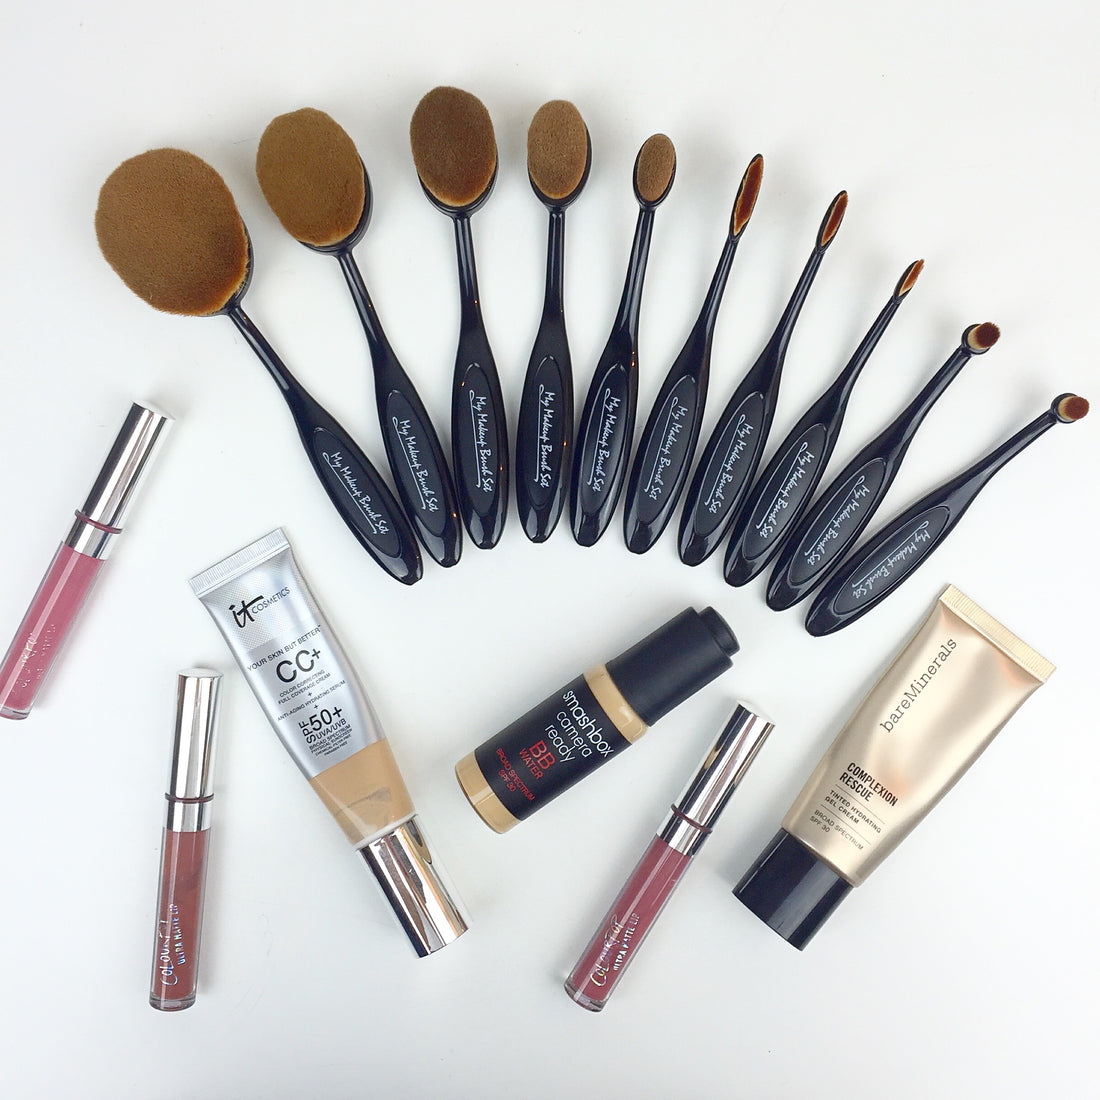 Oval Makeup Brushes: Worth the Hype?!